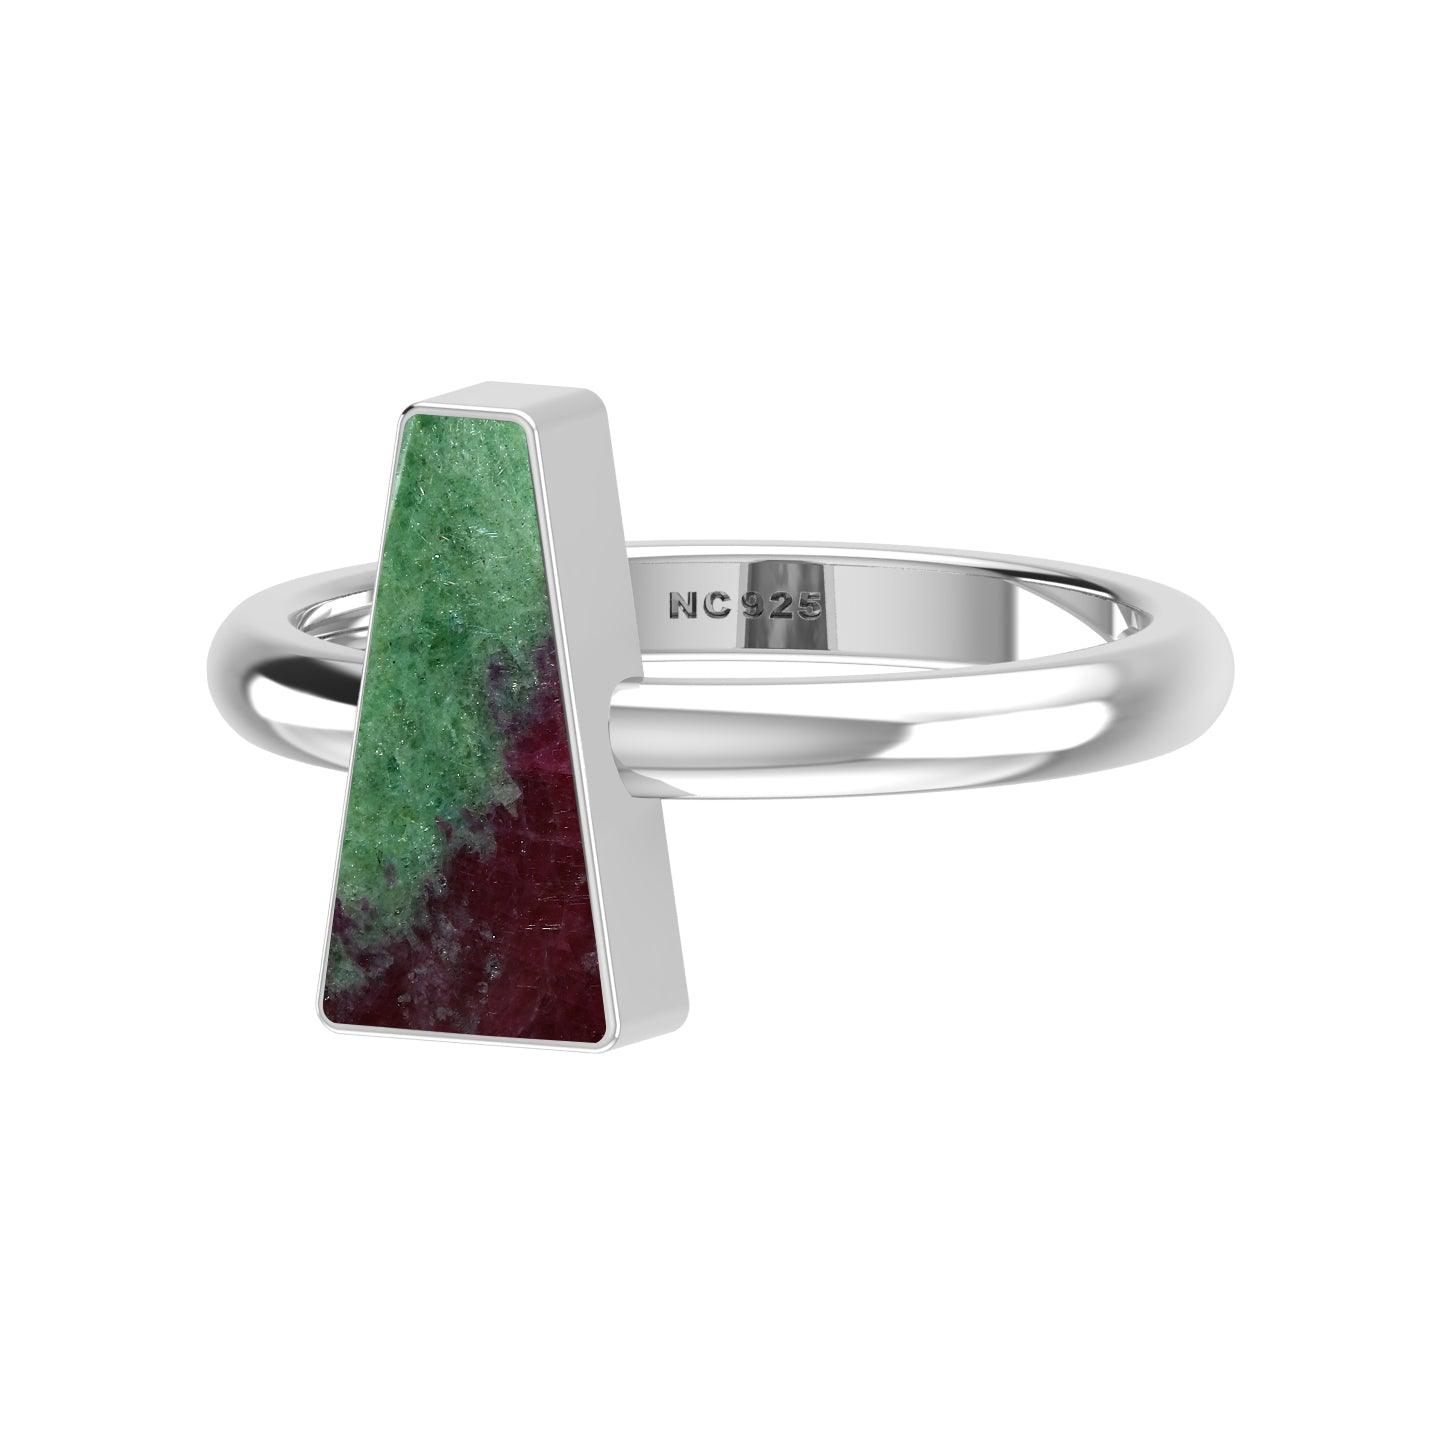 Natural Ruby Zoisite Ring 925 Sterling Silver Bezel Set Handmade Jewelry Pack of 6 - (Box 2)